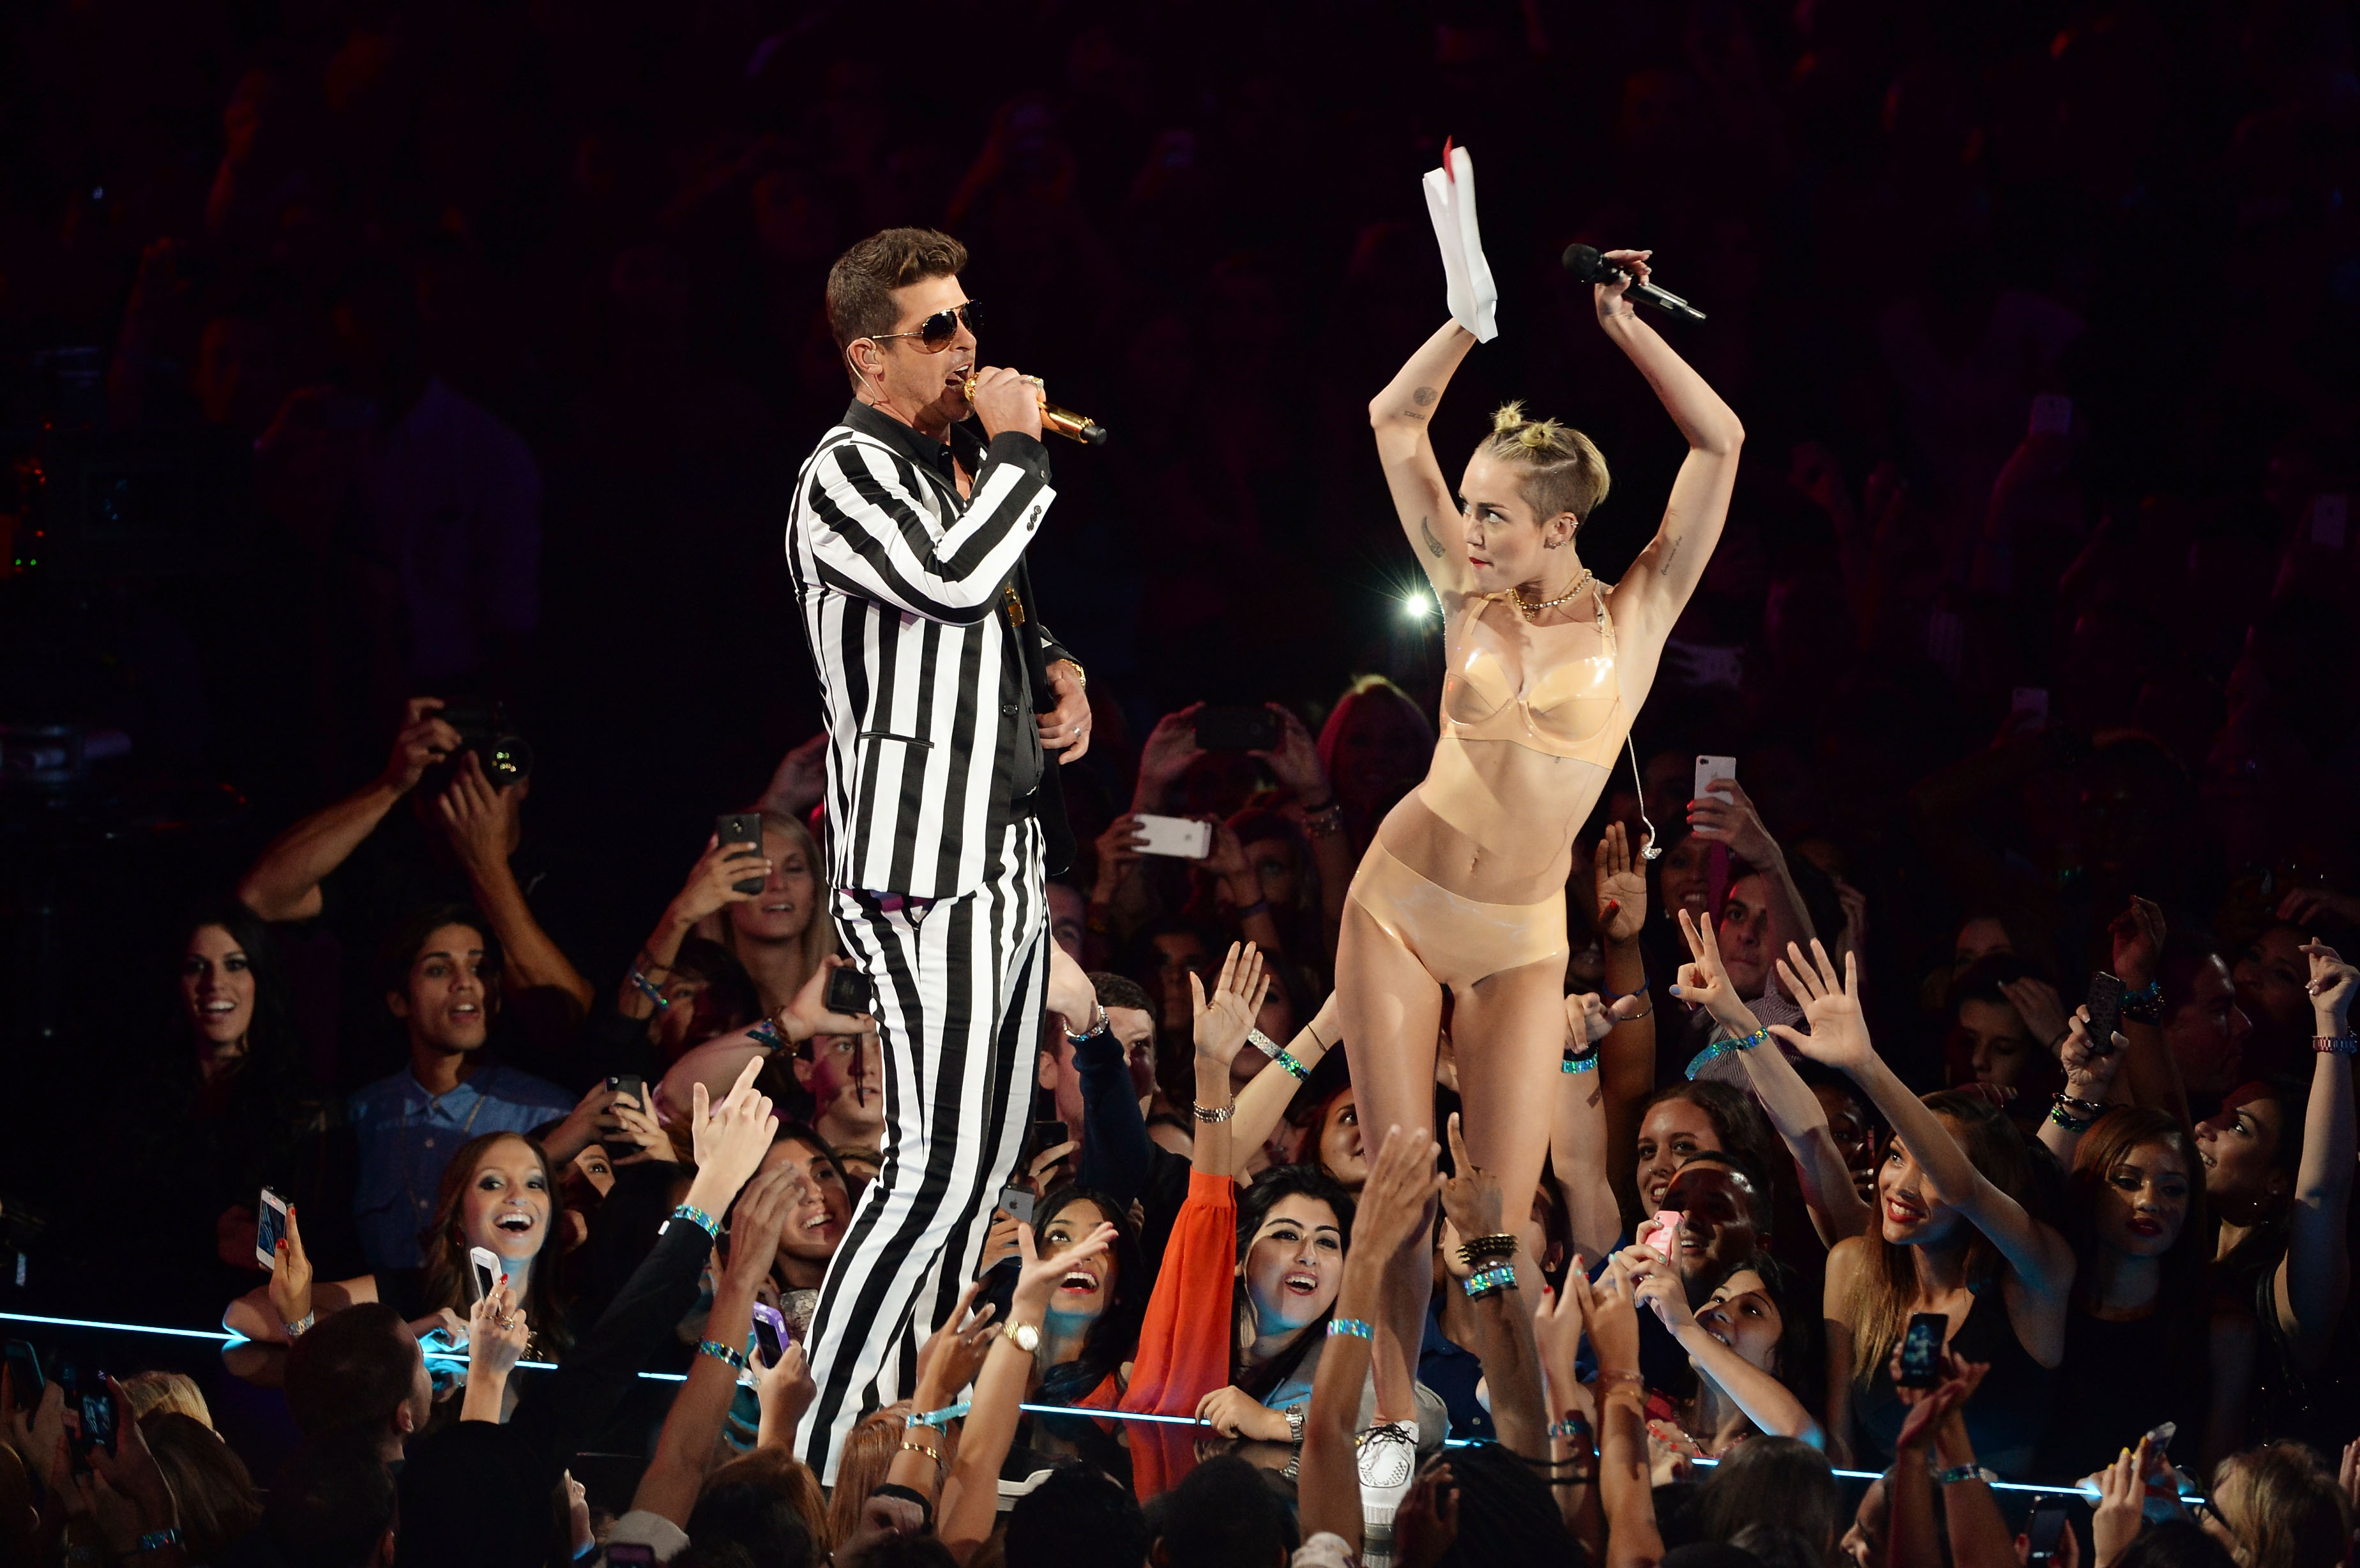 Robin Thicke and Miley Cyrus on a stage